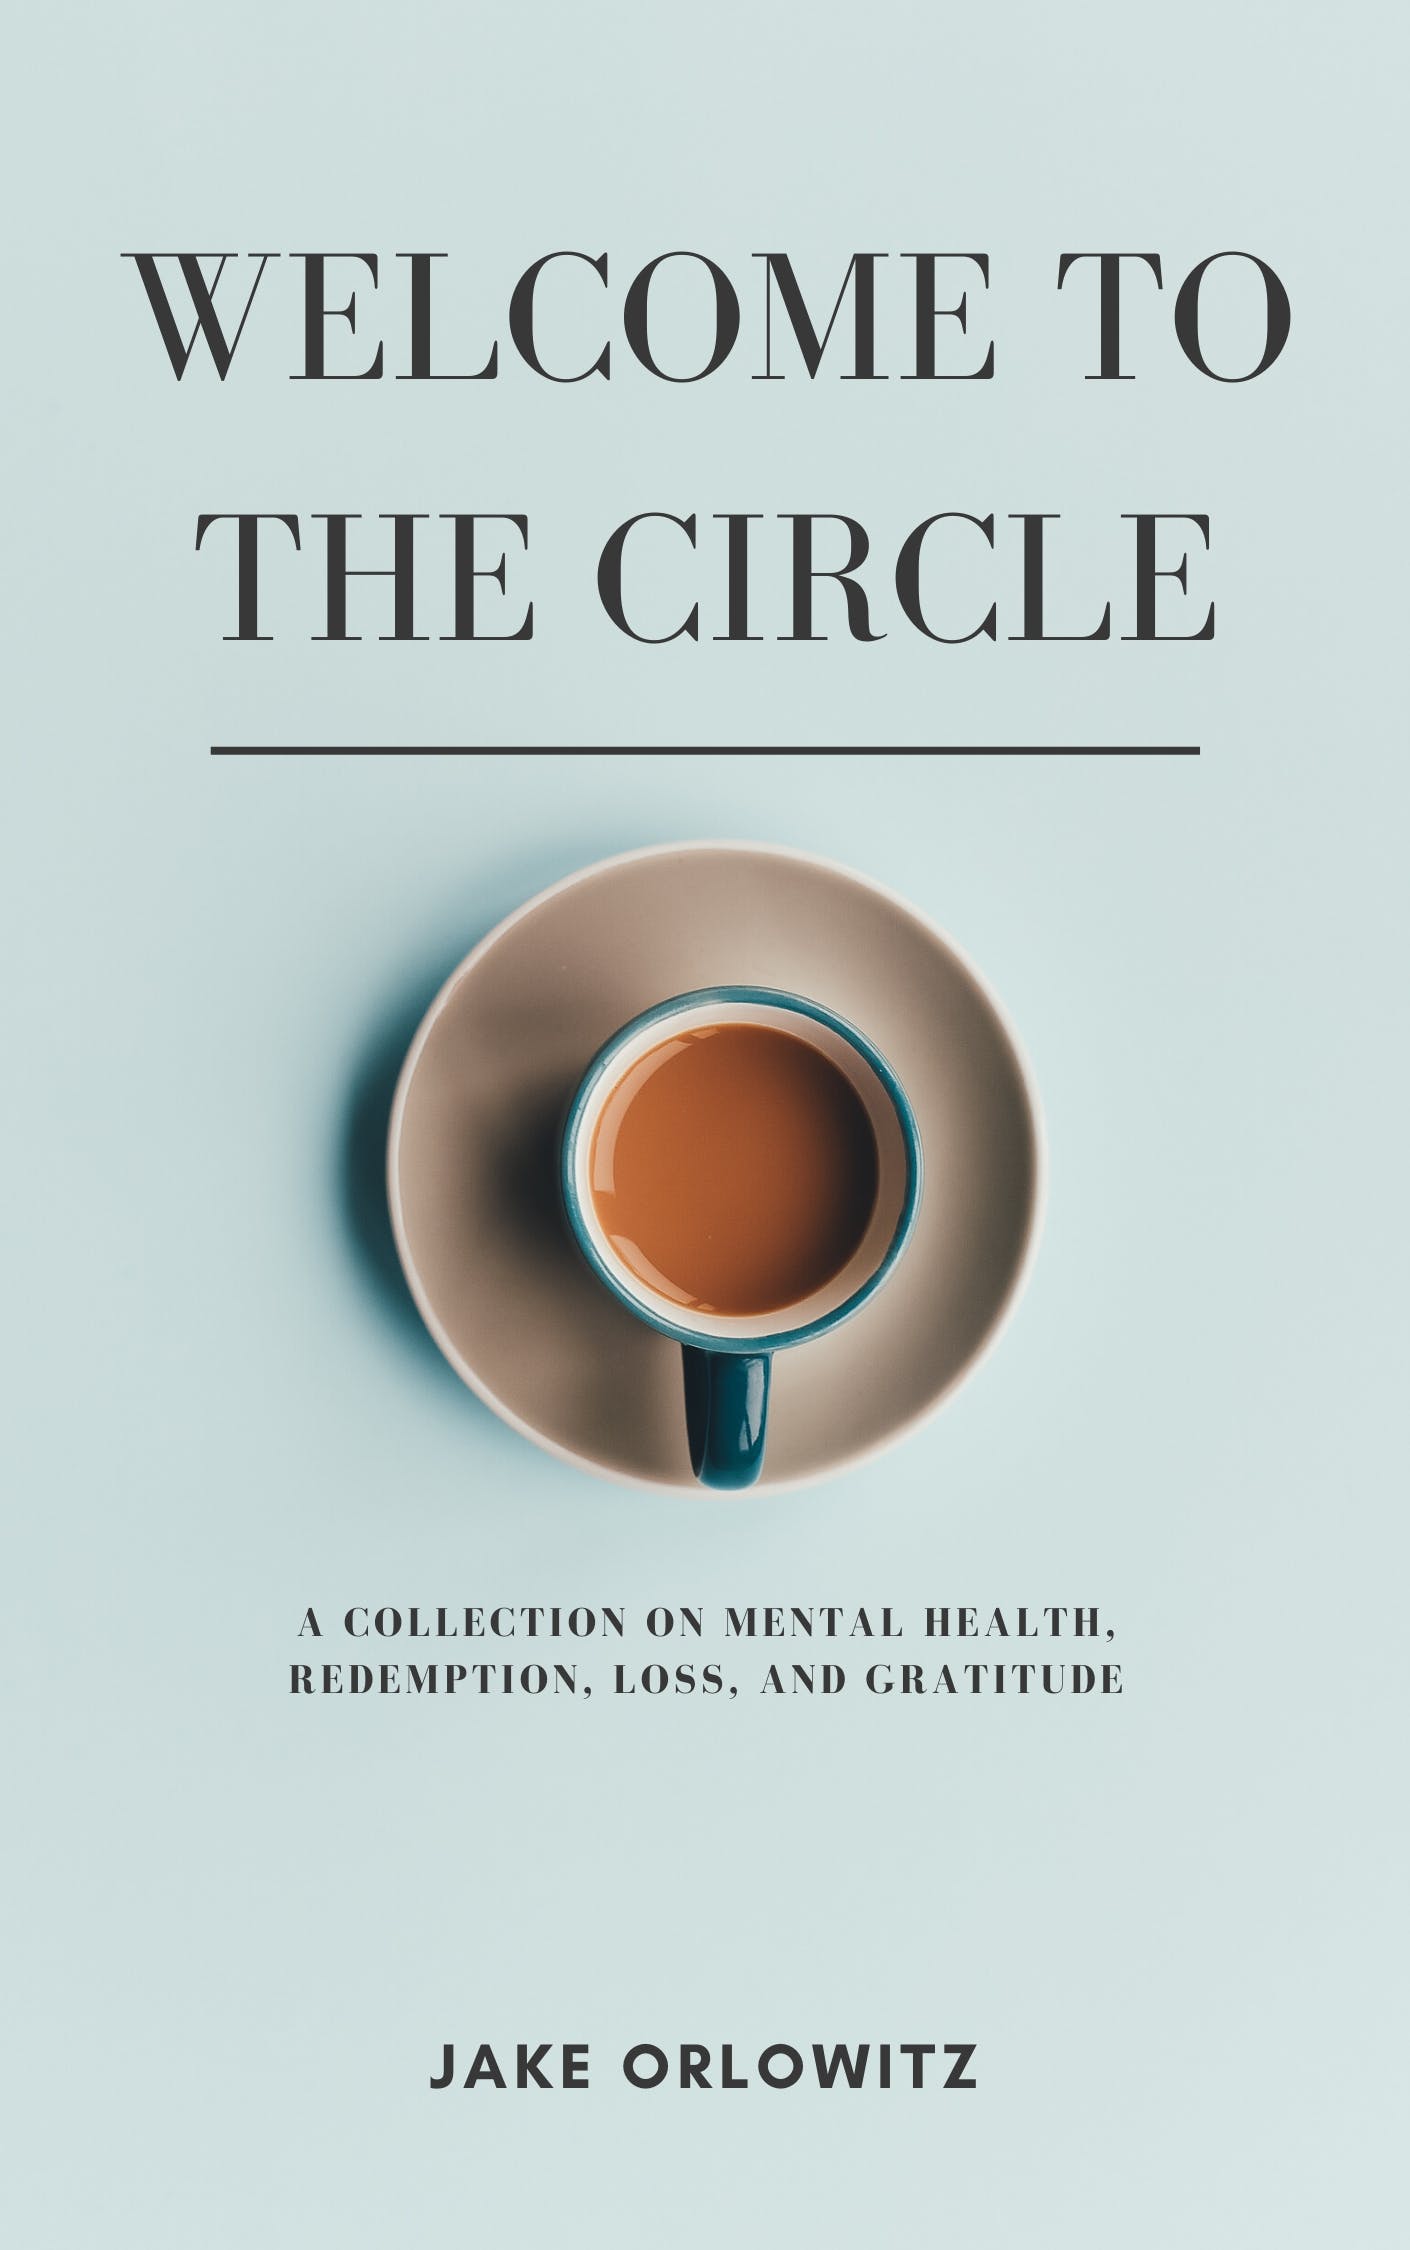 Welcome to the Circle: On Mental Health media 2